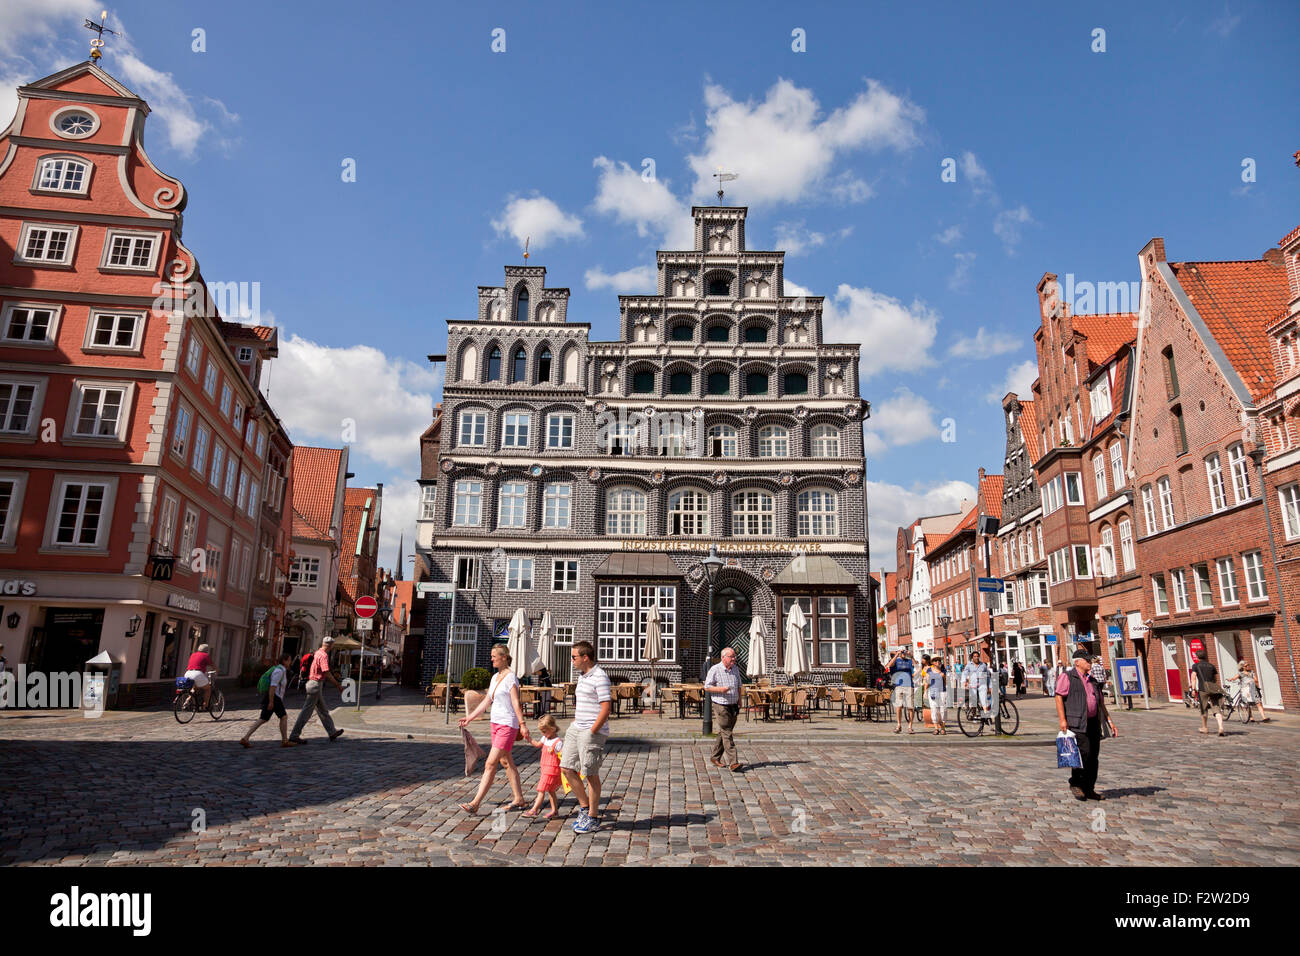 Gabled houses, Platz Am Sande, square in the historic centre, Hanseatic city of Lüneburg, Lower Saxony, Germany, Europe Stock Photo